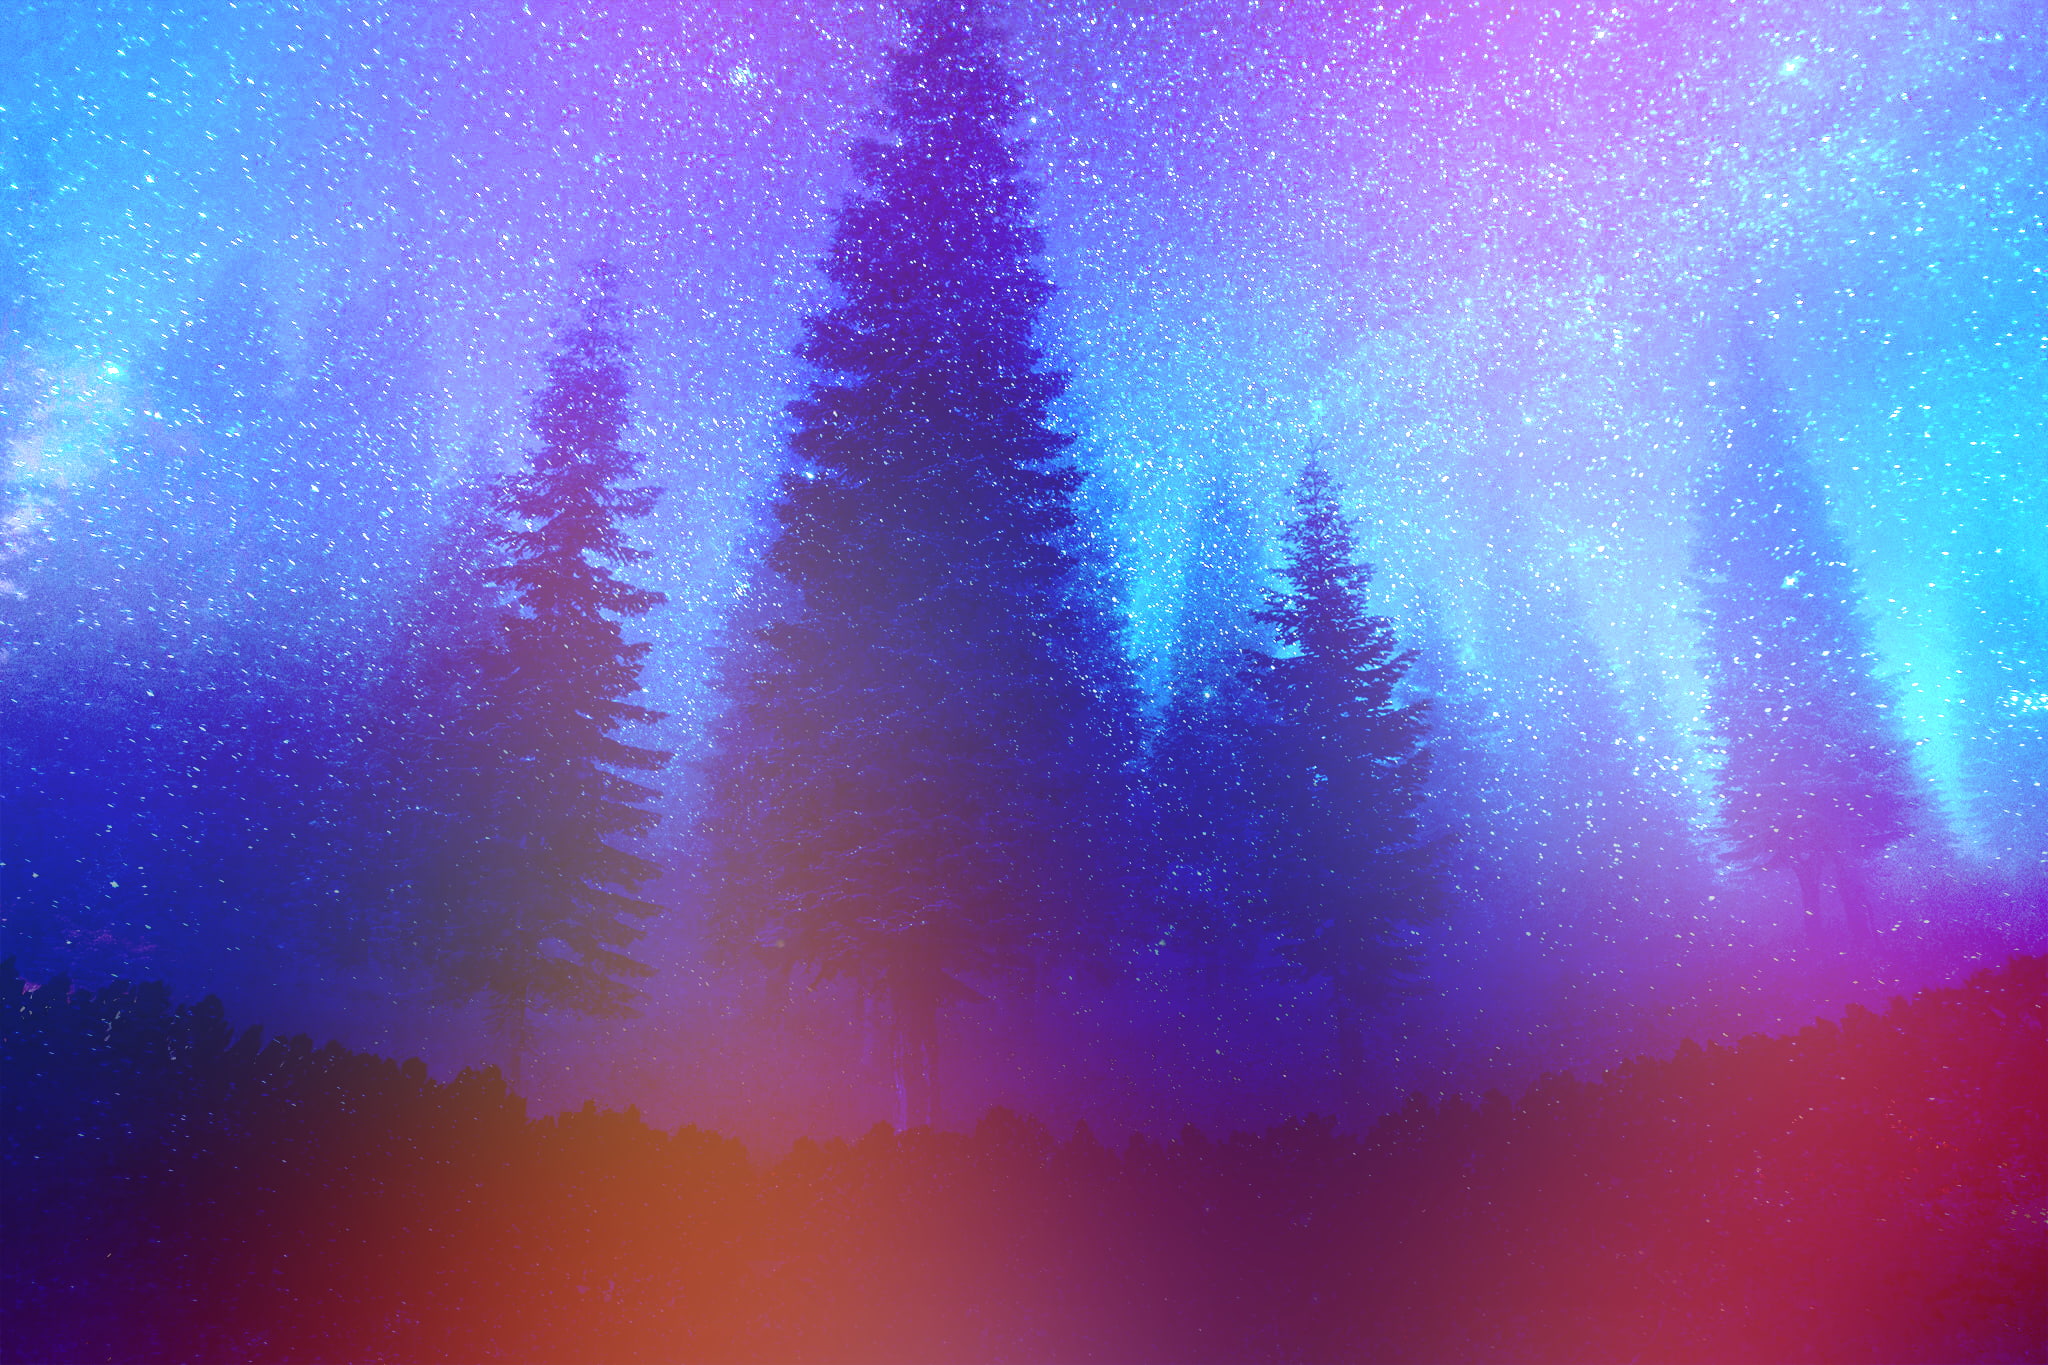 night, forest, constellations, mist, nature, stars, colorful